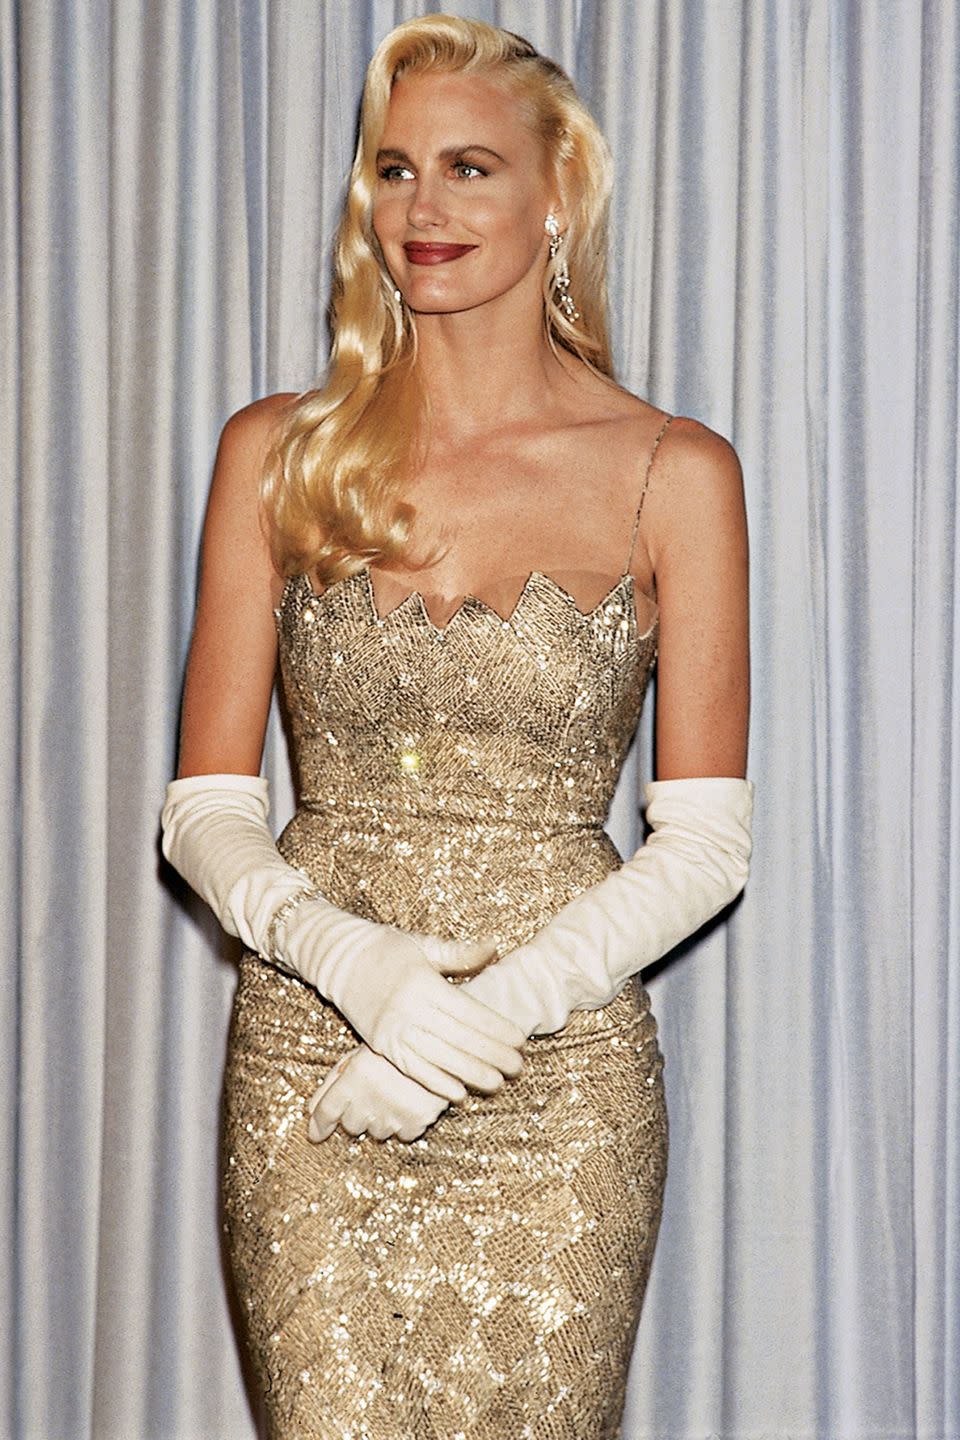 <p>While the popularity of elbow-length gloves was waning, they made even more of a statement when Daryl Hannah paired them with her glamorous gold dress and long blonde waves. </p>